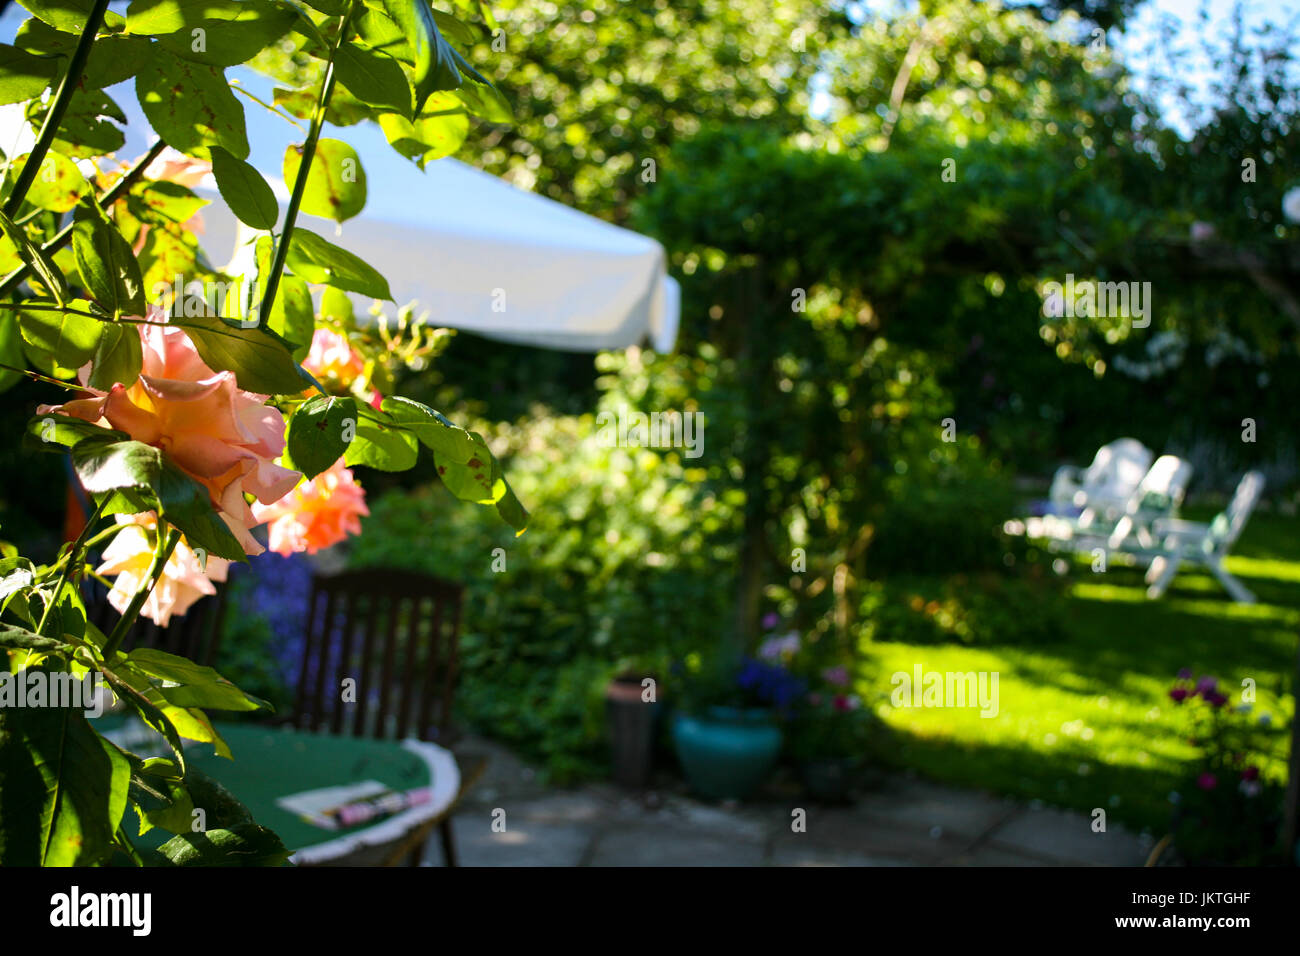 Pink rose in foreground with garden with white parasol, garden table and garden furniture in background Stock Photo